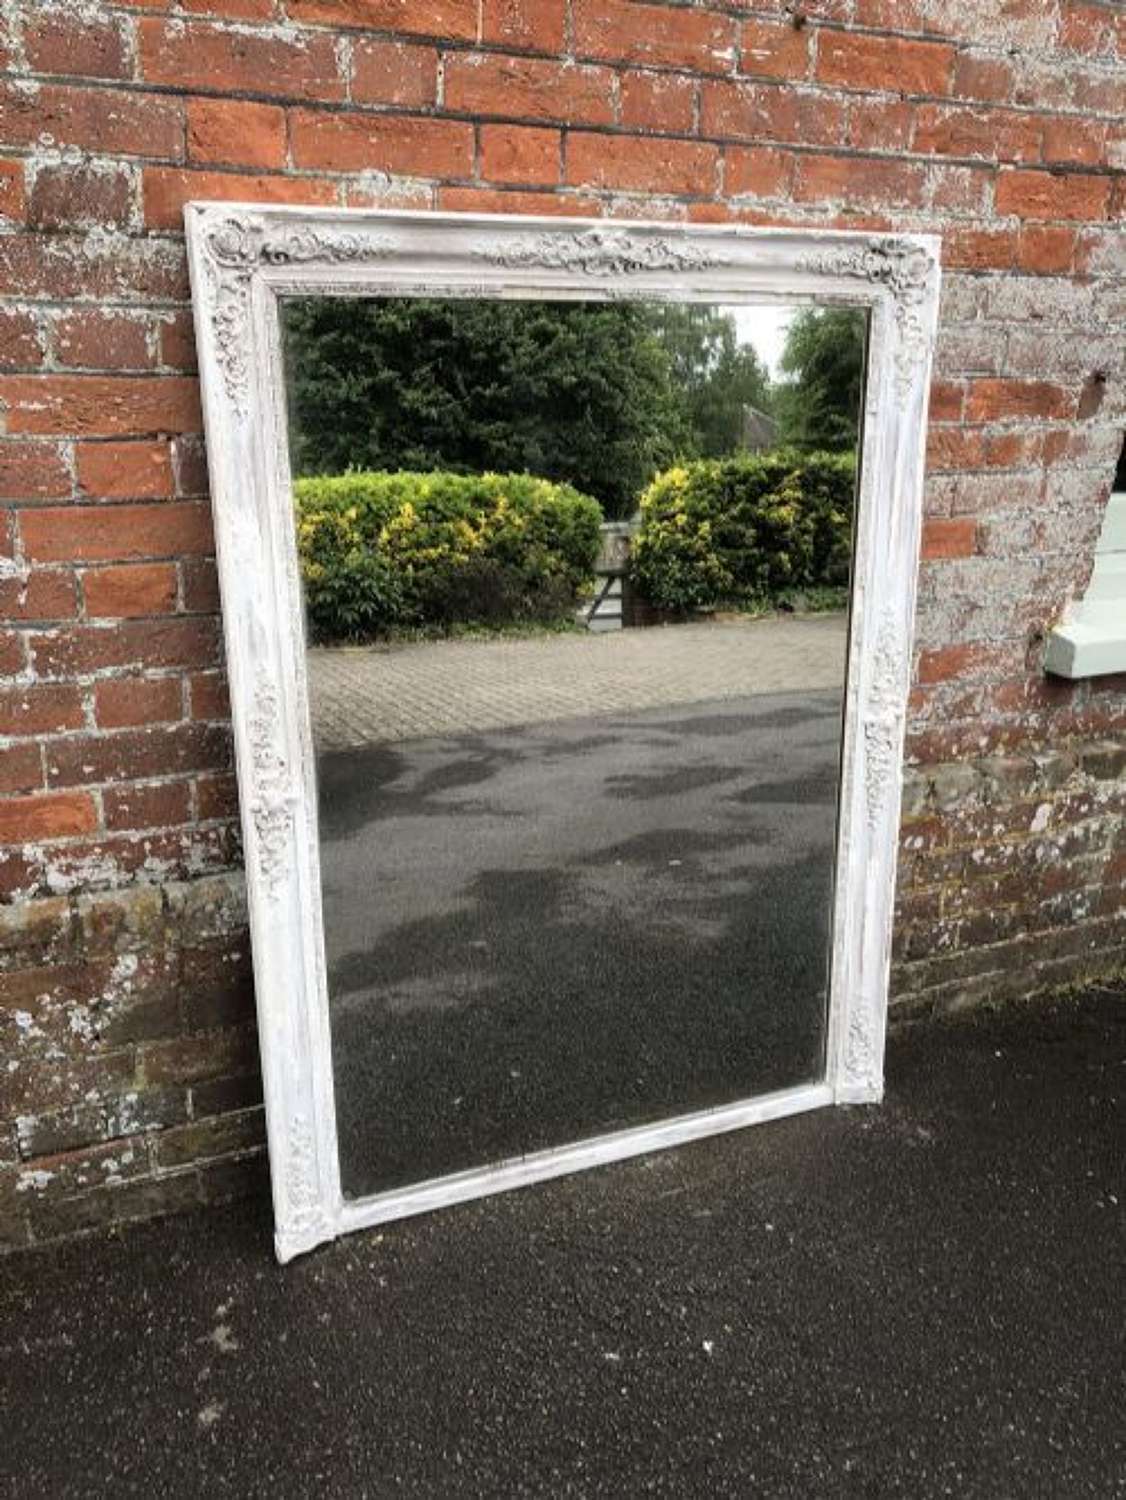 A Highly Decorative Original Early Antique 19th C Distressed Mirror